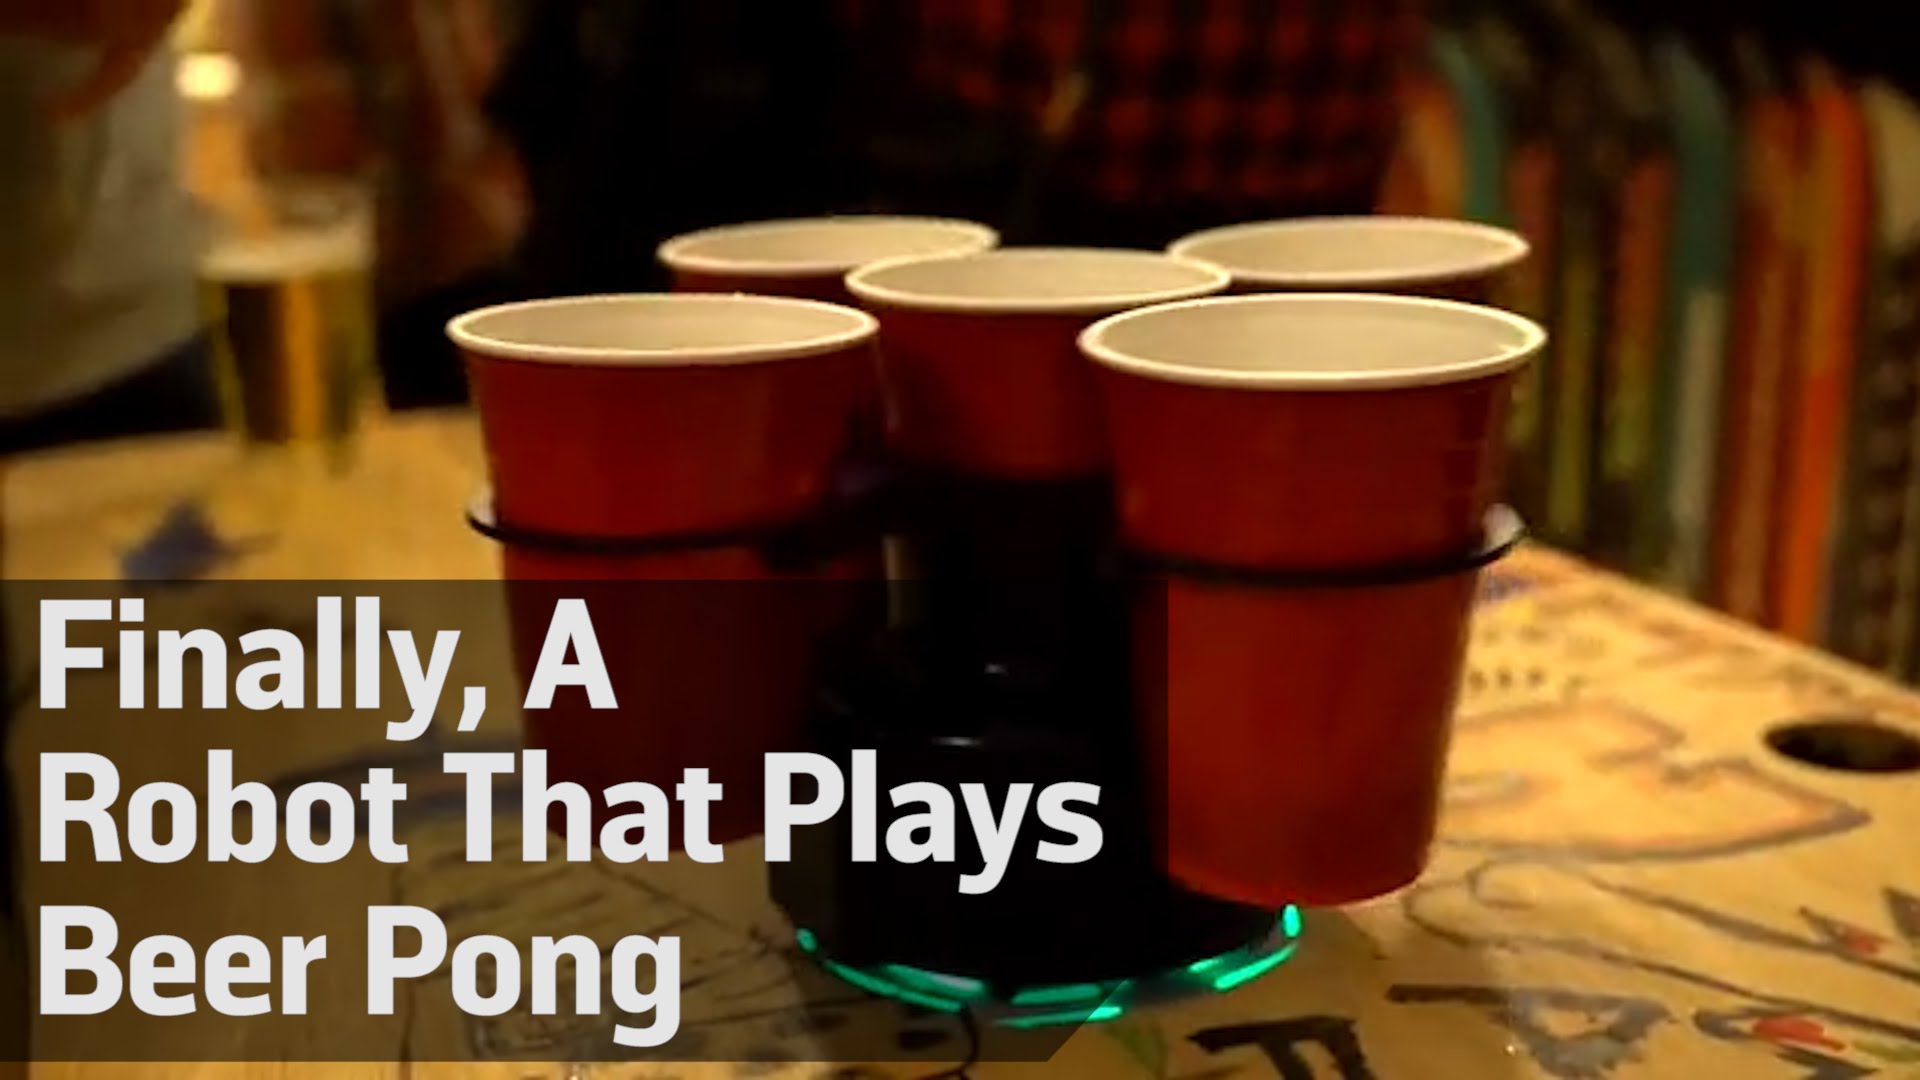 Finally, A Robot that Plays BEER PONG